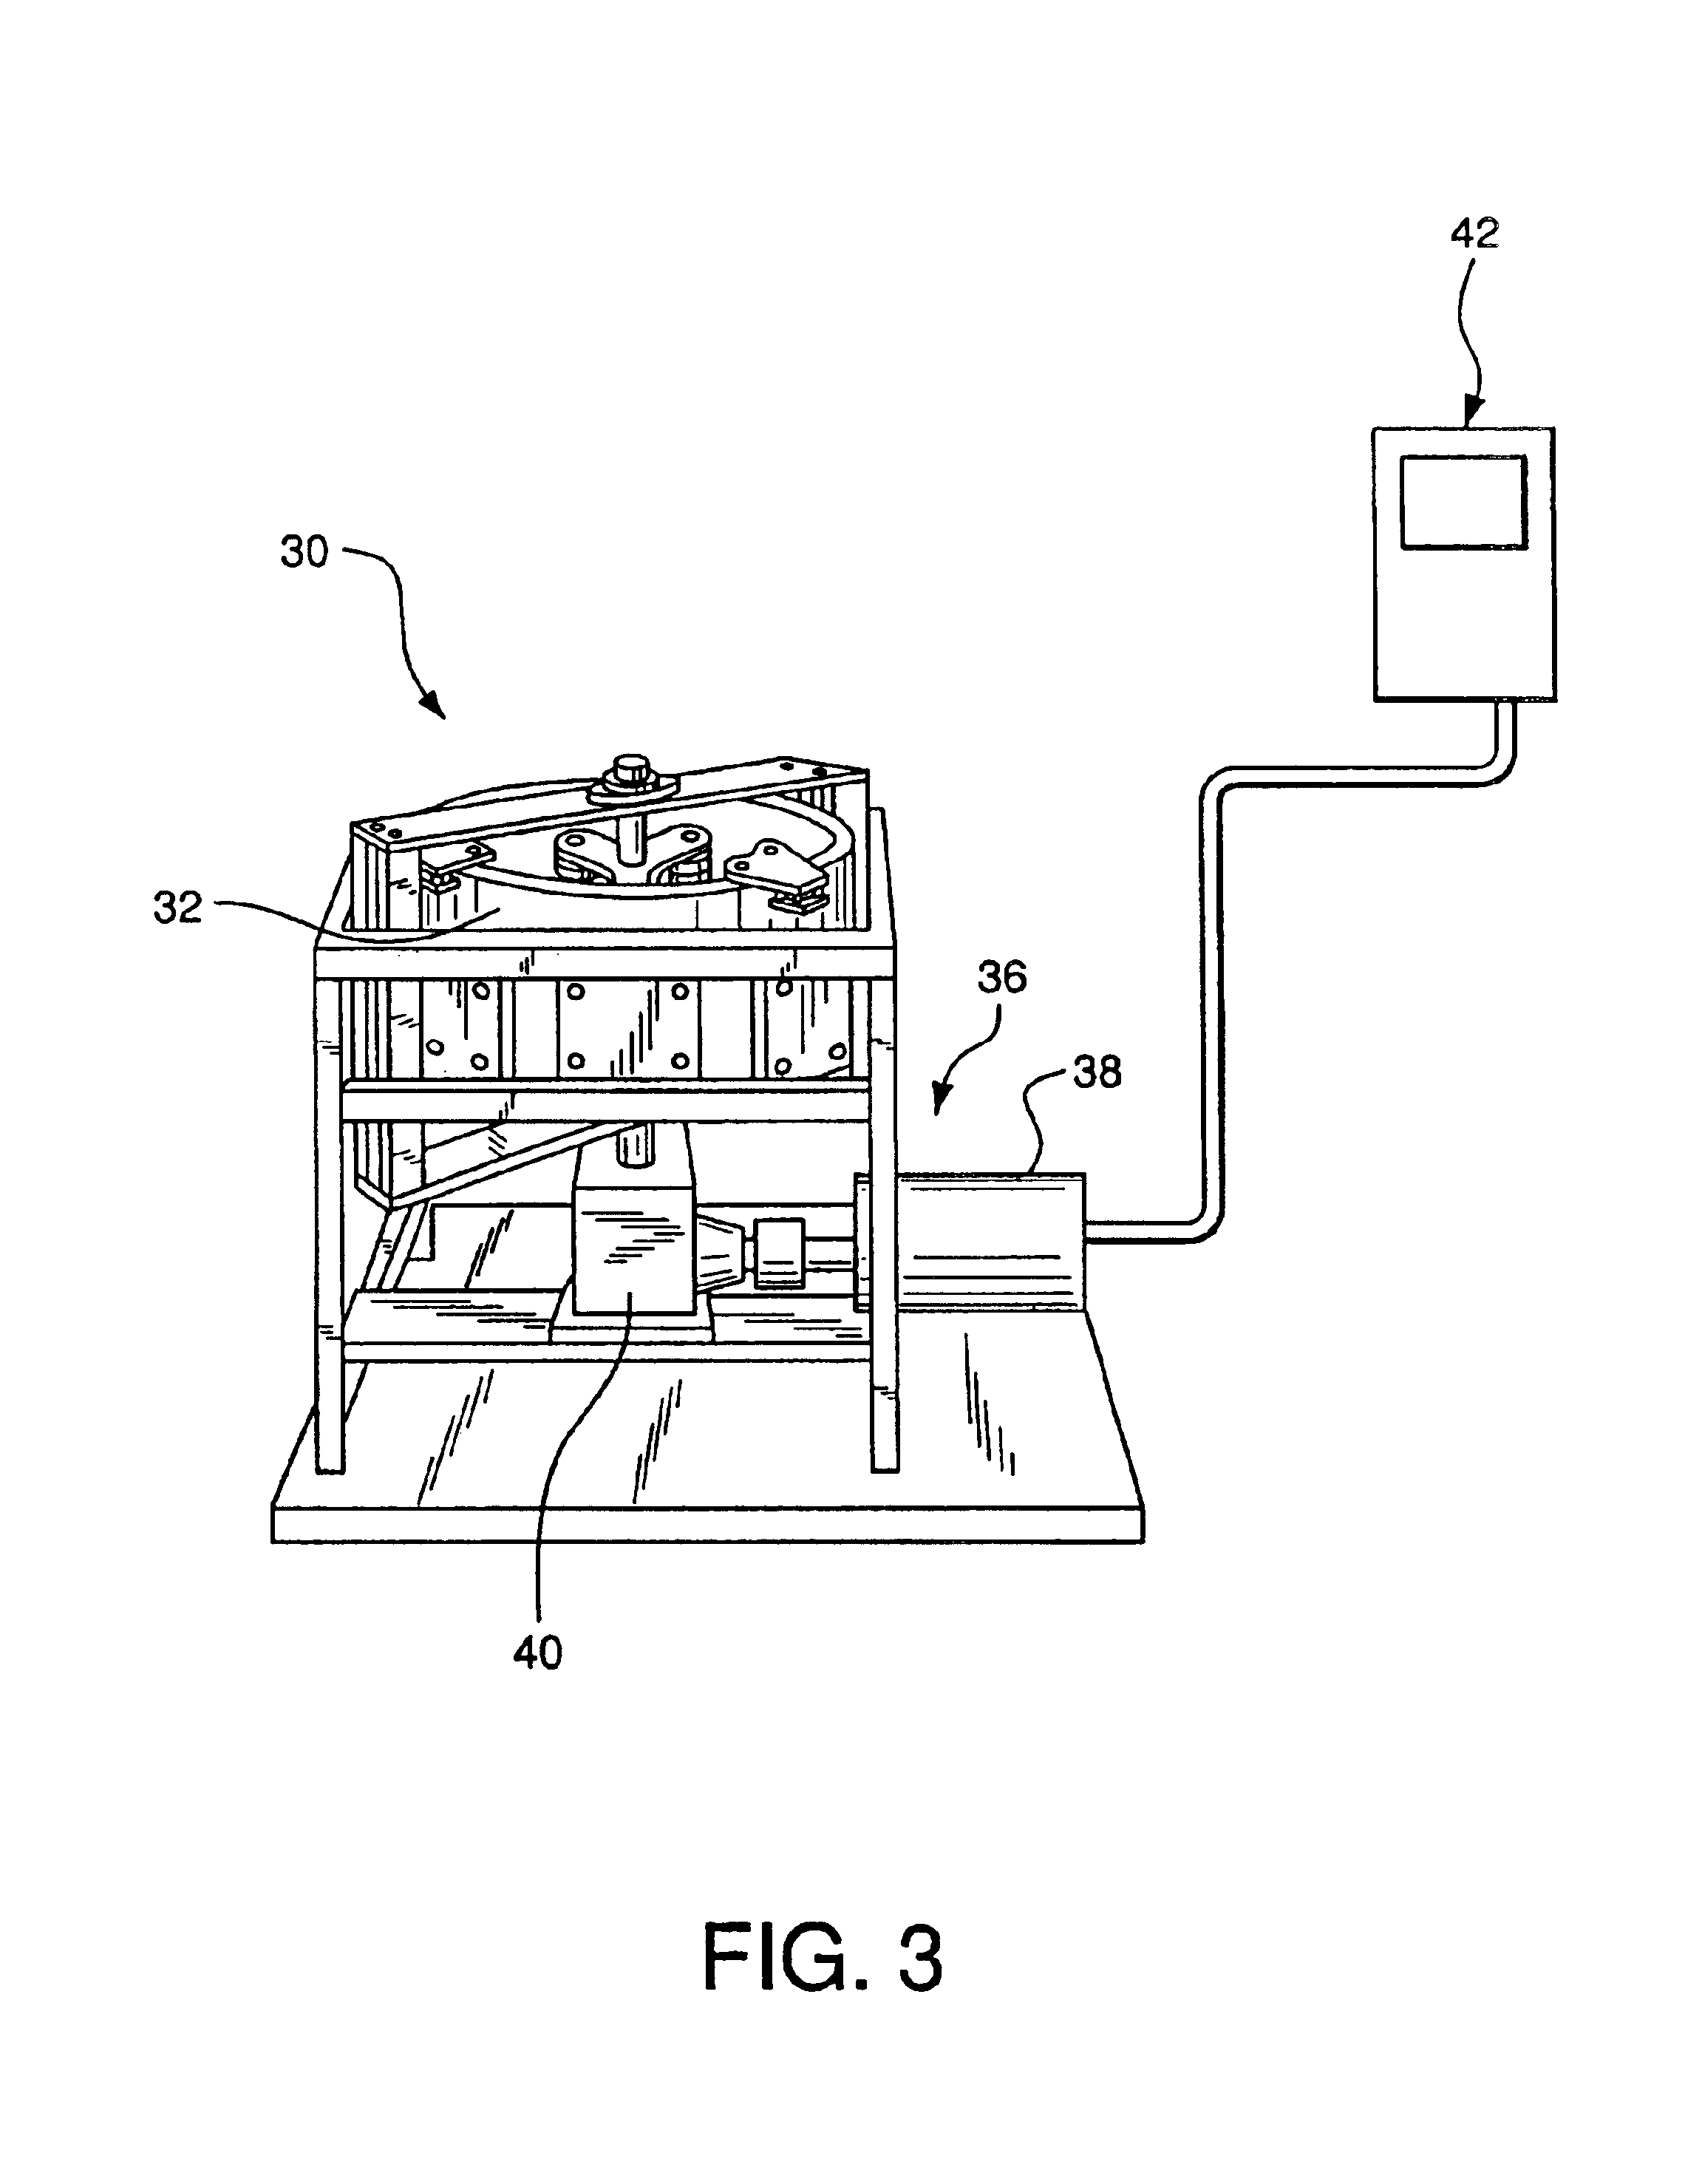 Method of manufacturing a tool using a rotational processing apparatus